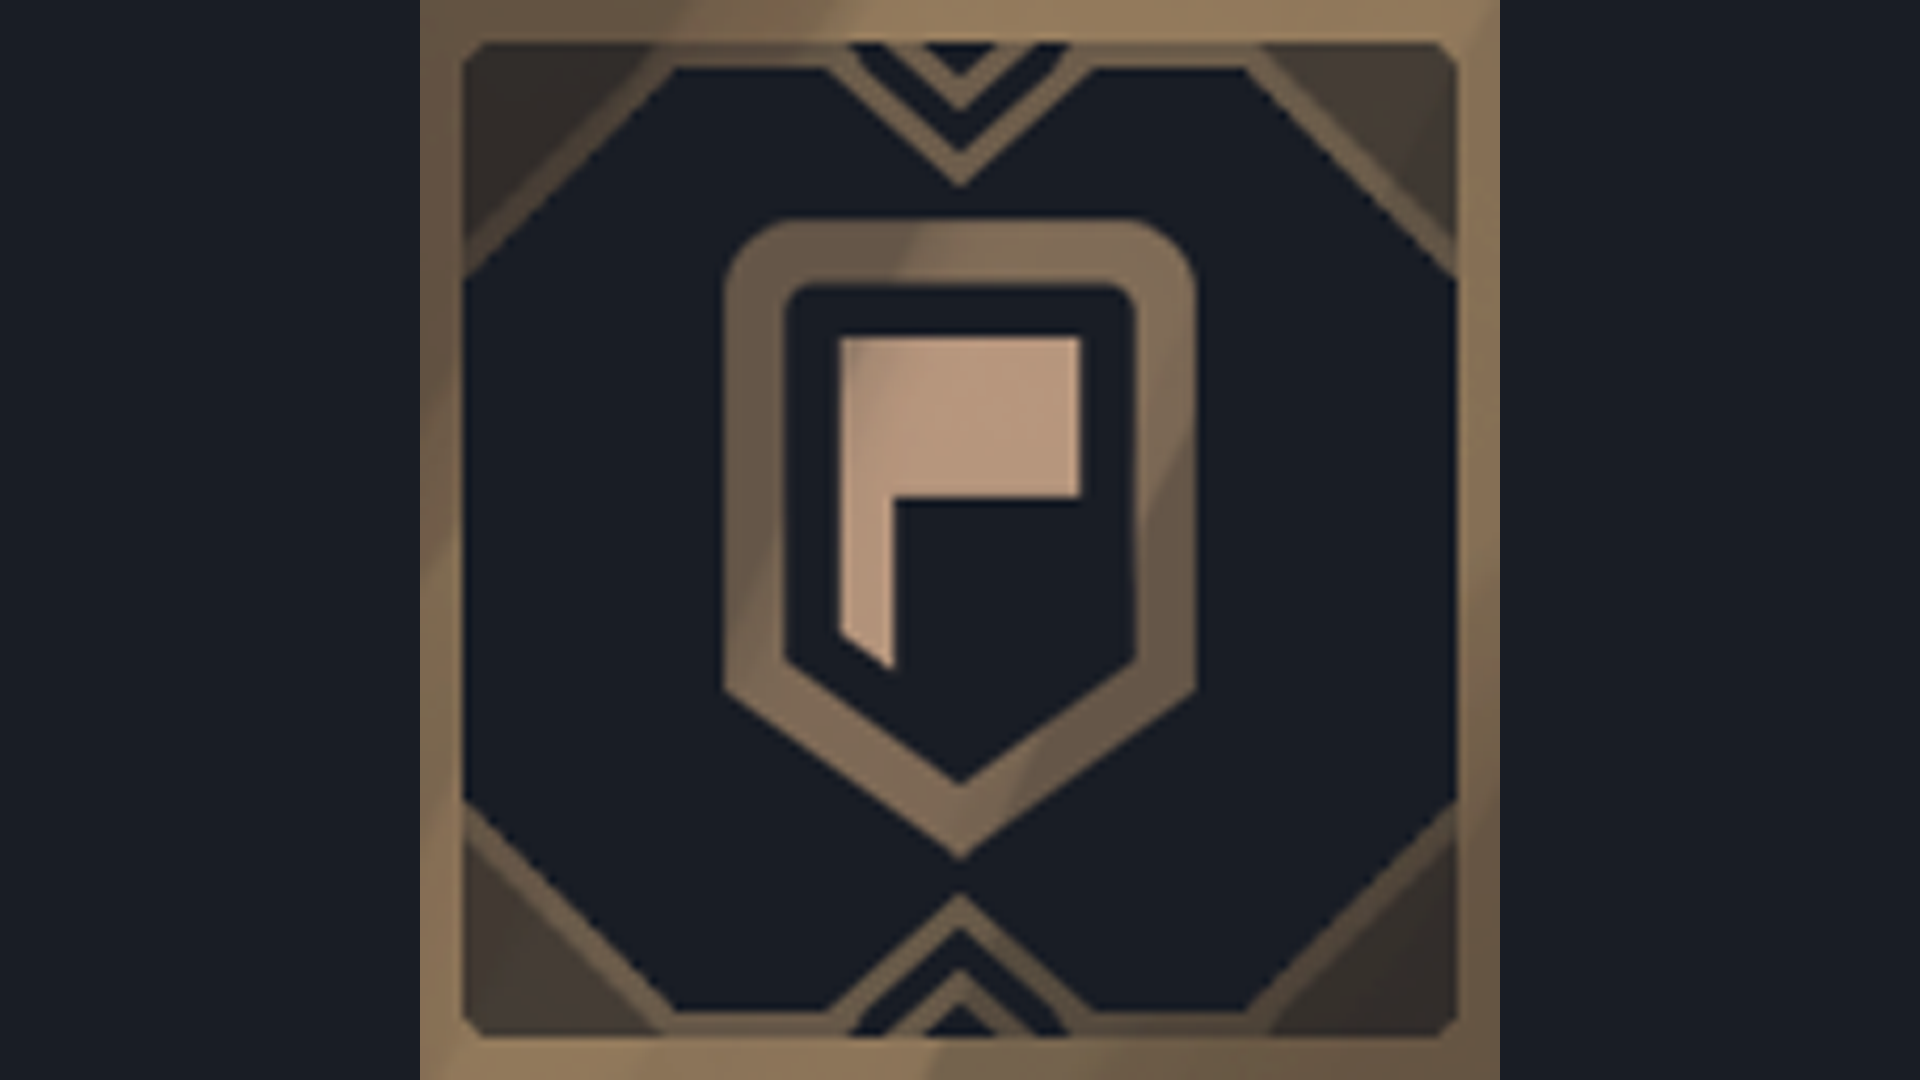 Icon for Expansionist